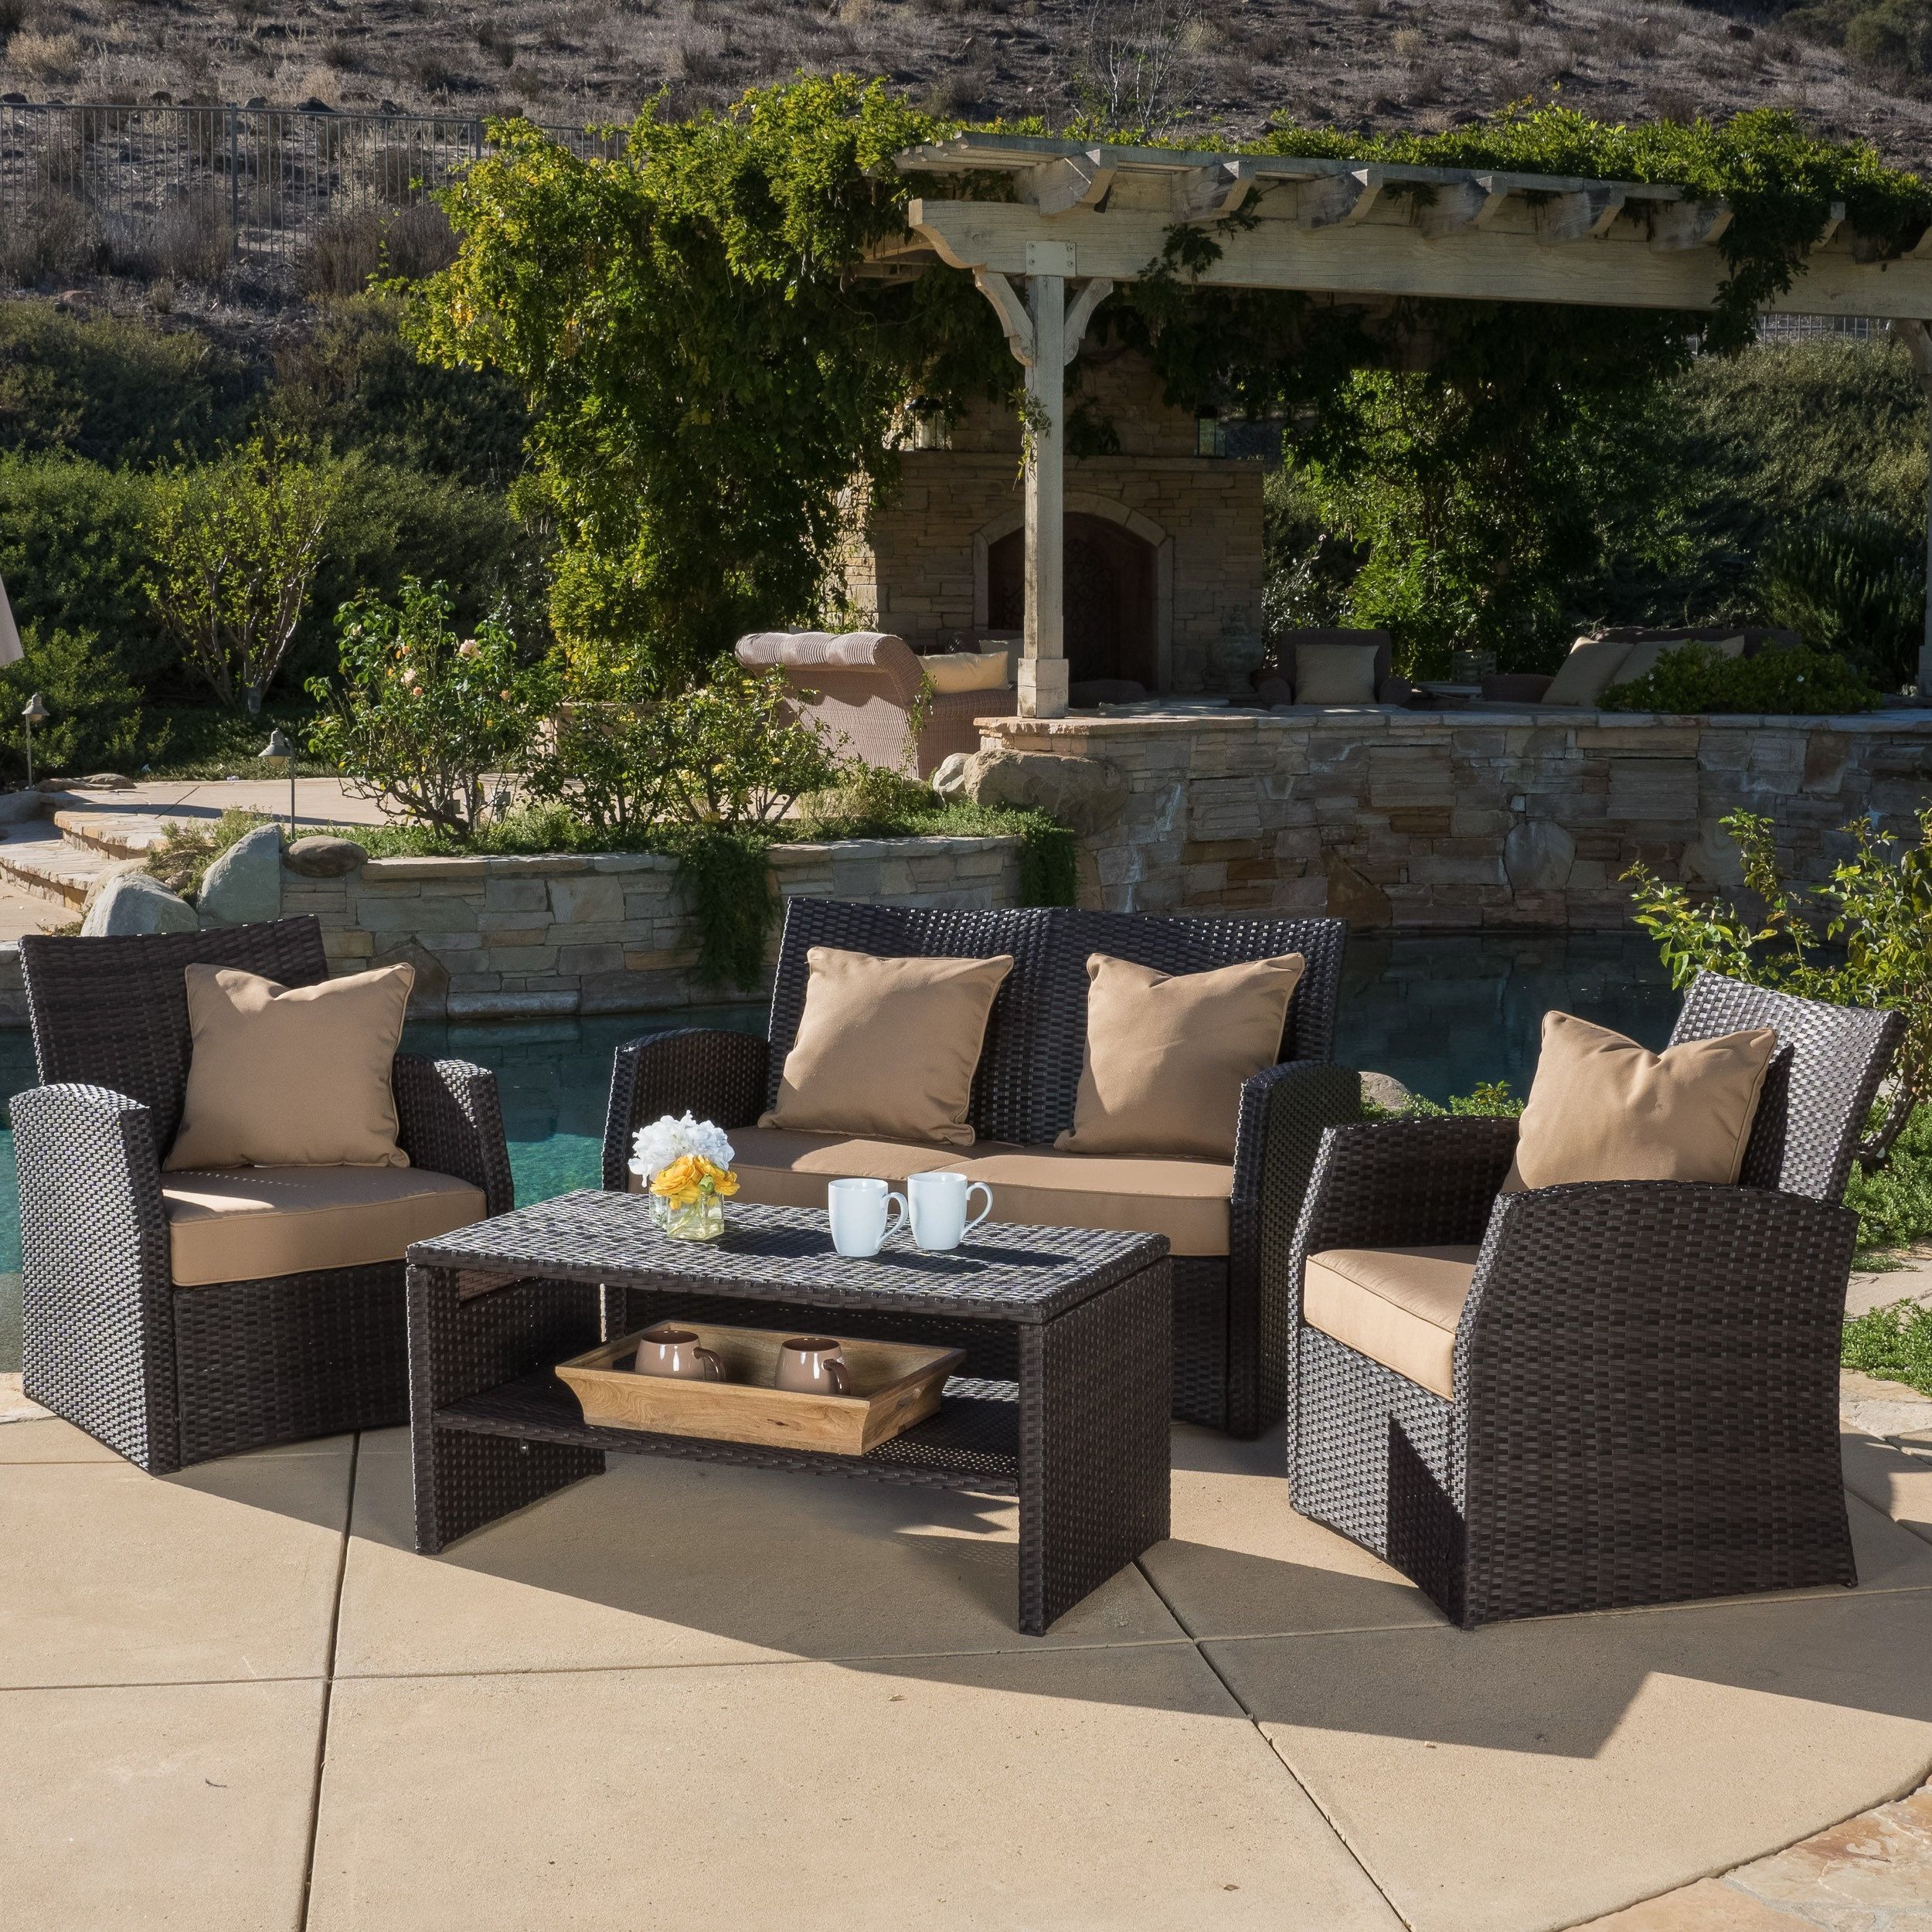 Sanger Outdoor 4 Piece Wicker Seating Setchristopher Knight Home With 4 Piece Wicker Outdoor Seating Sets (View 7 of 15)